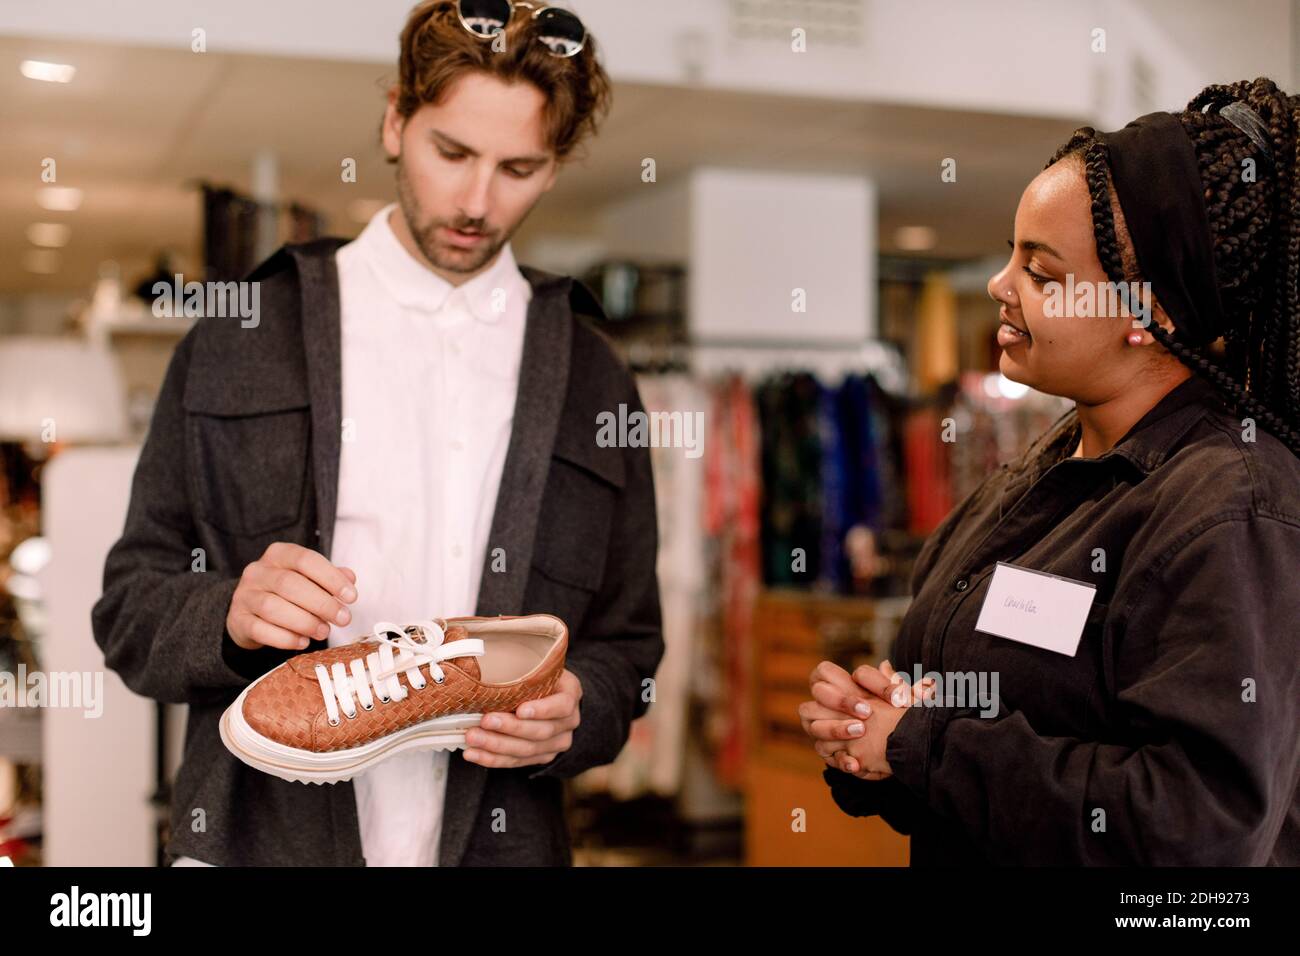 Smiling saleswoman showing shoe to male customer at retail store Stock Photo